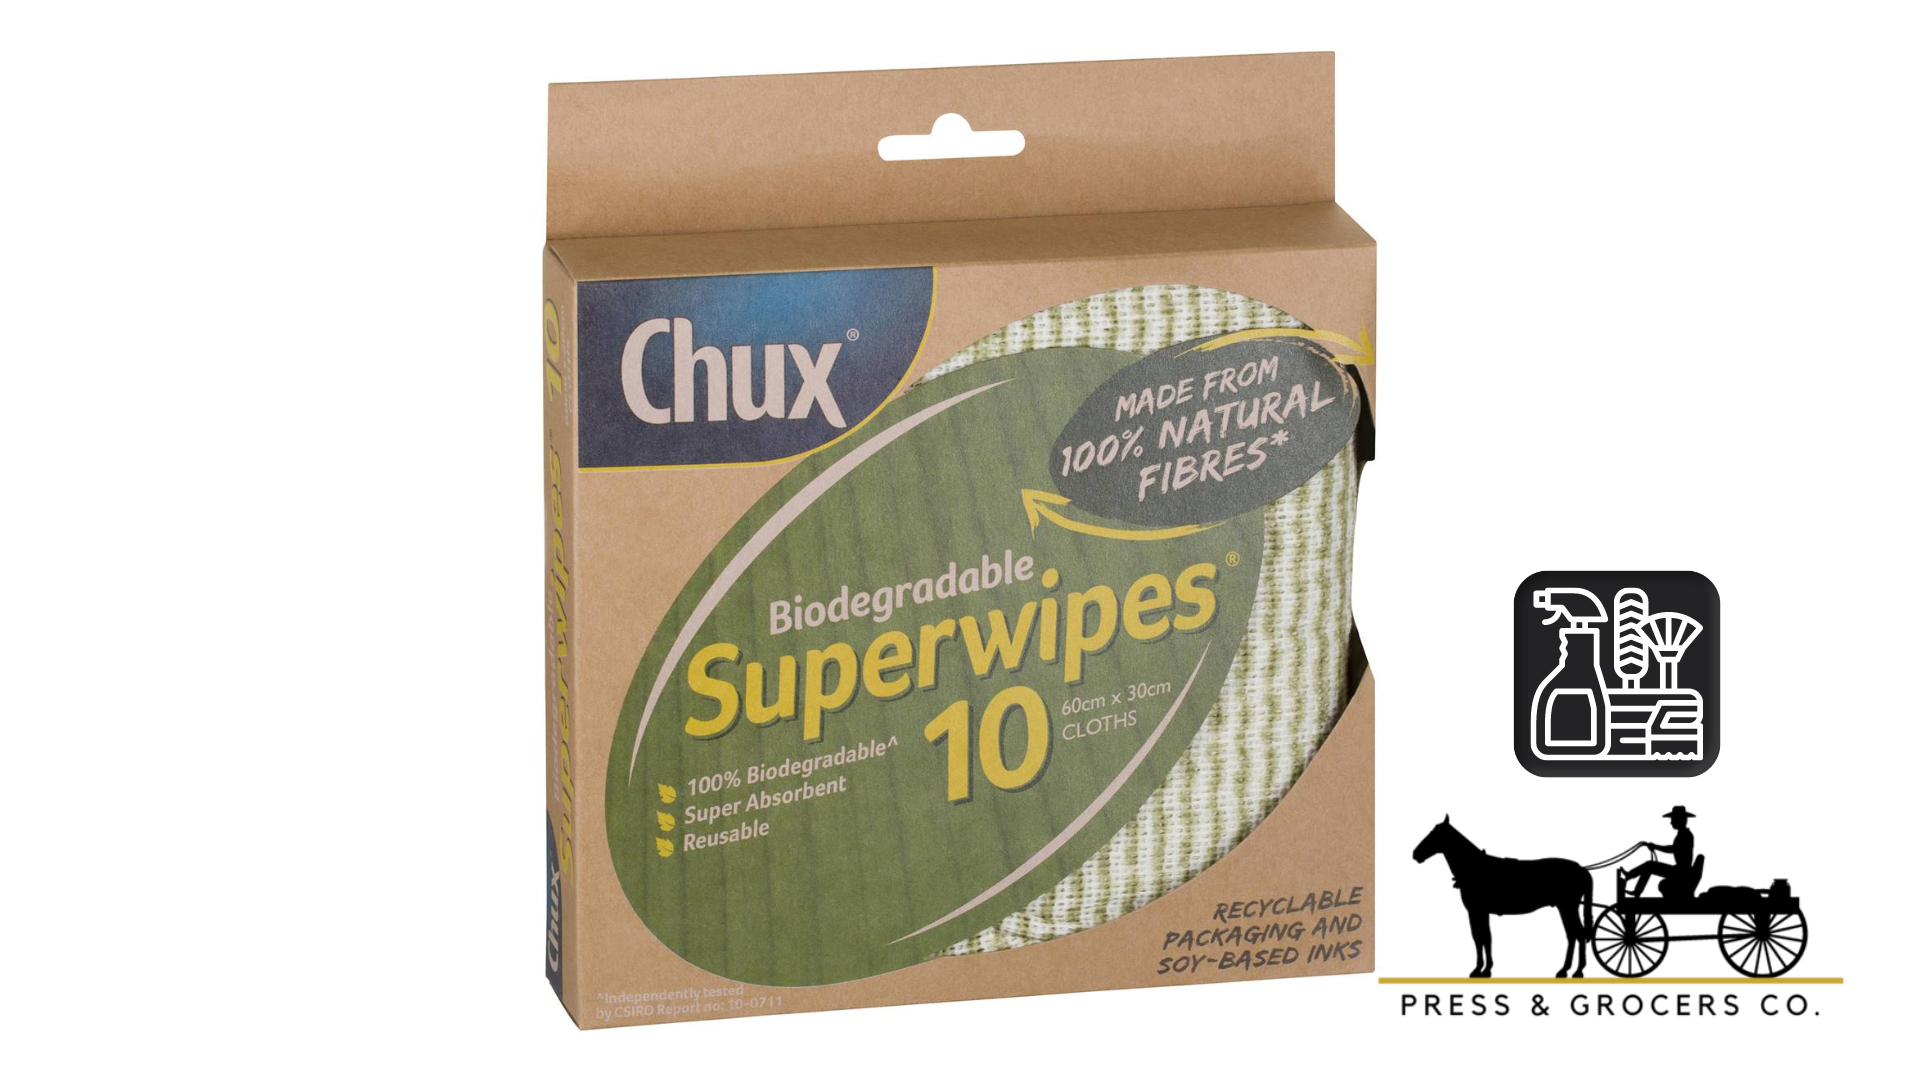 Chux Biodegradable Superwipes (10 Pack)